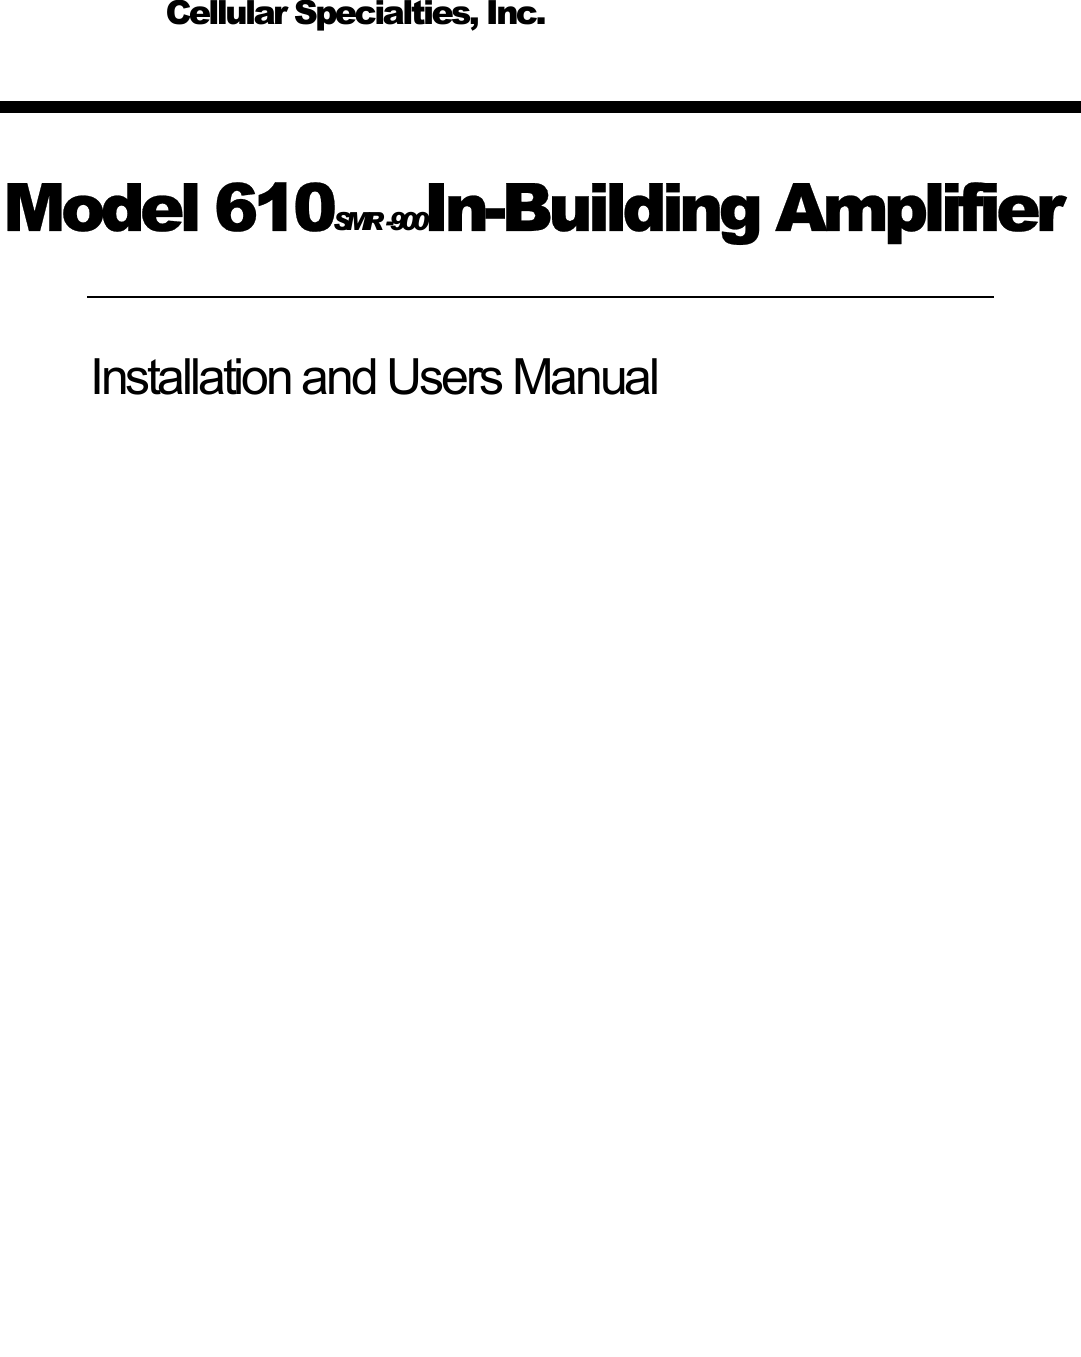     Model 610SMR  -900In-Building Amplifier Installation and Users Manual       Cellular Specialties, Inc. 